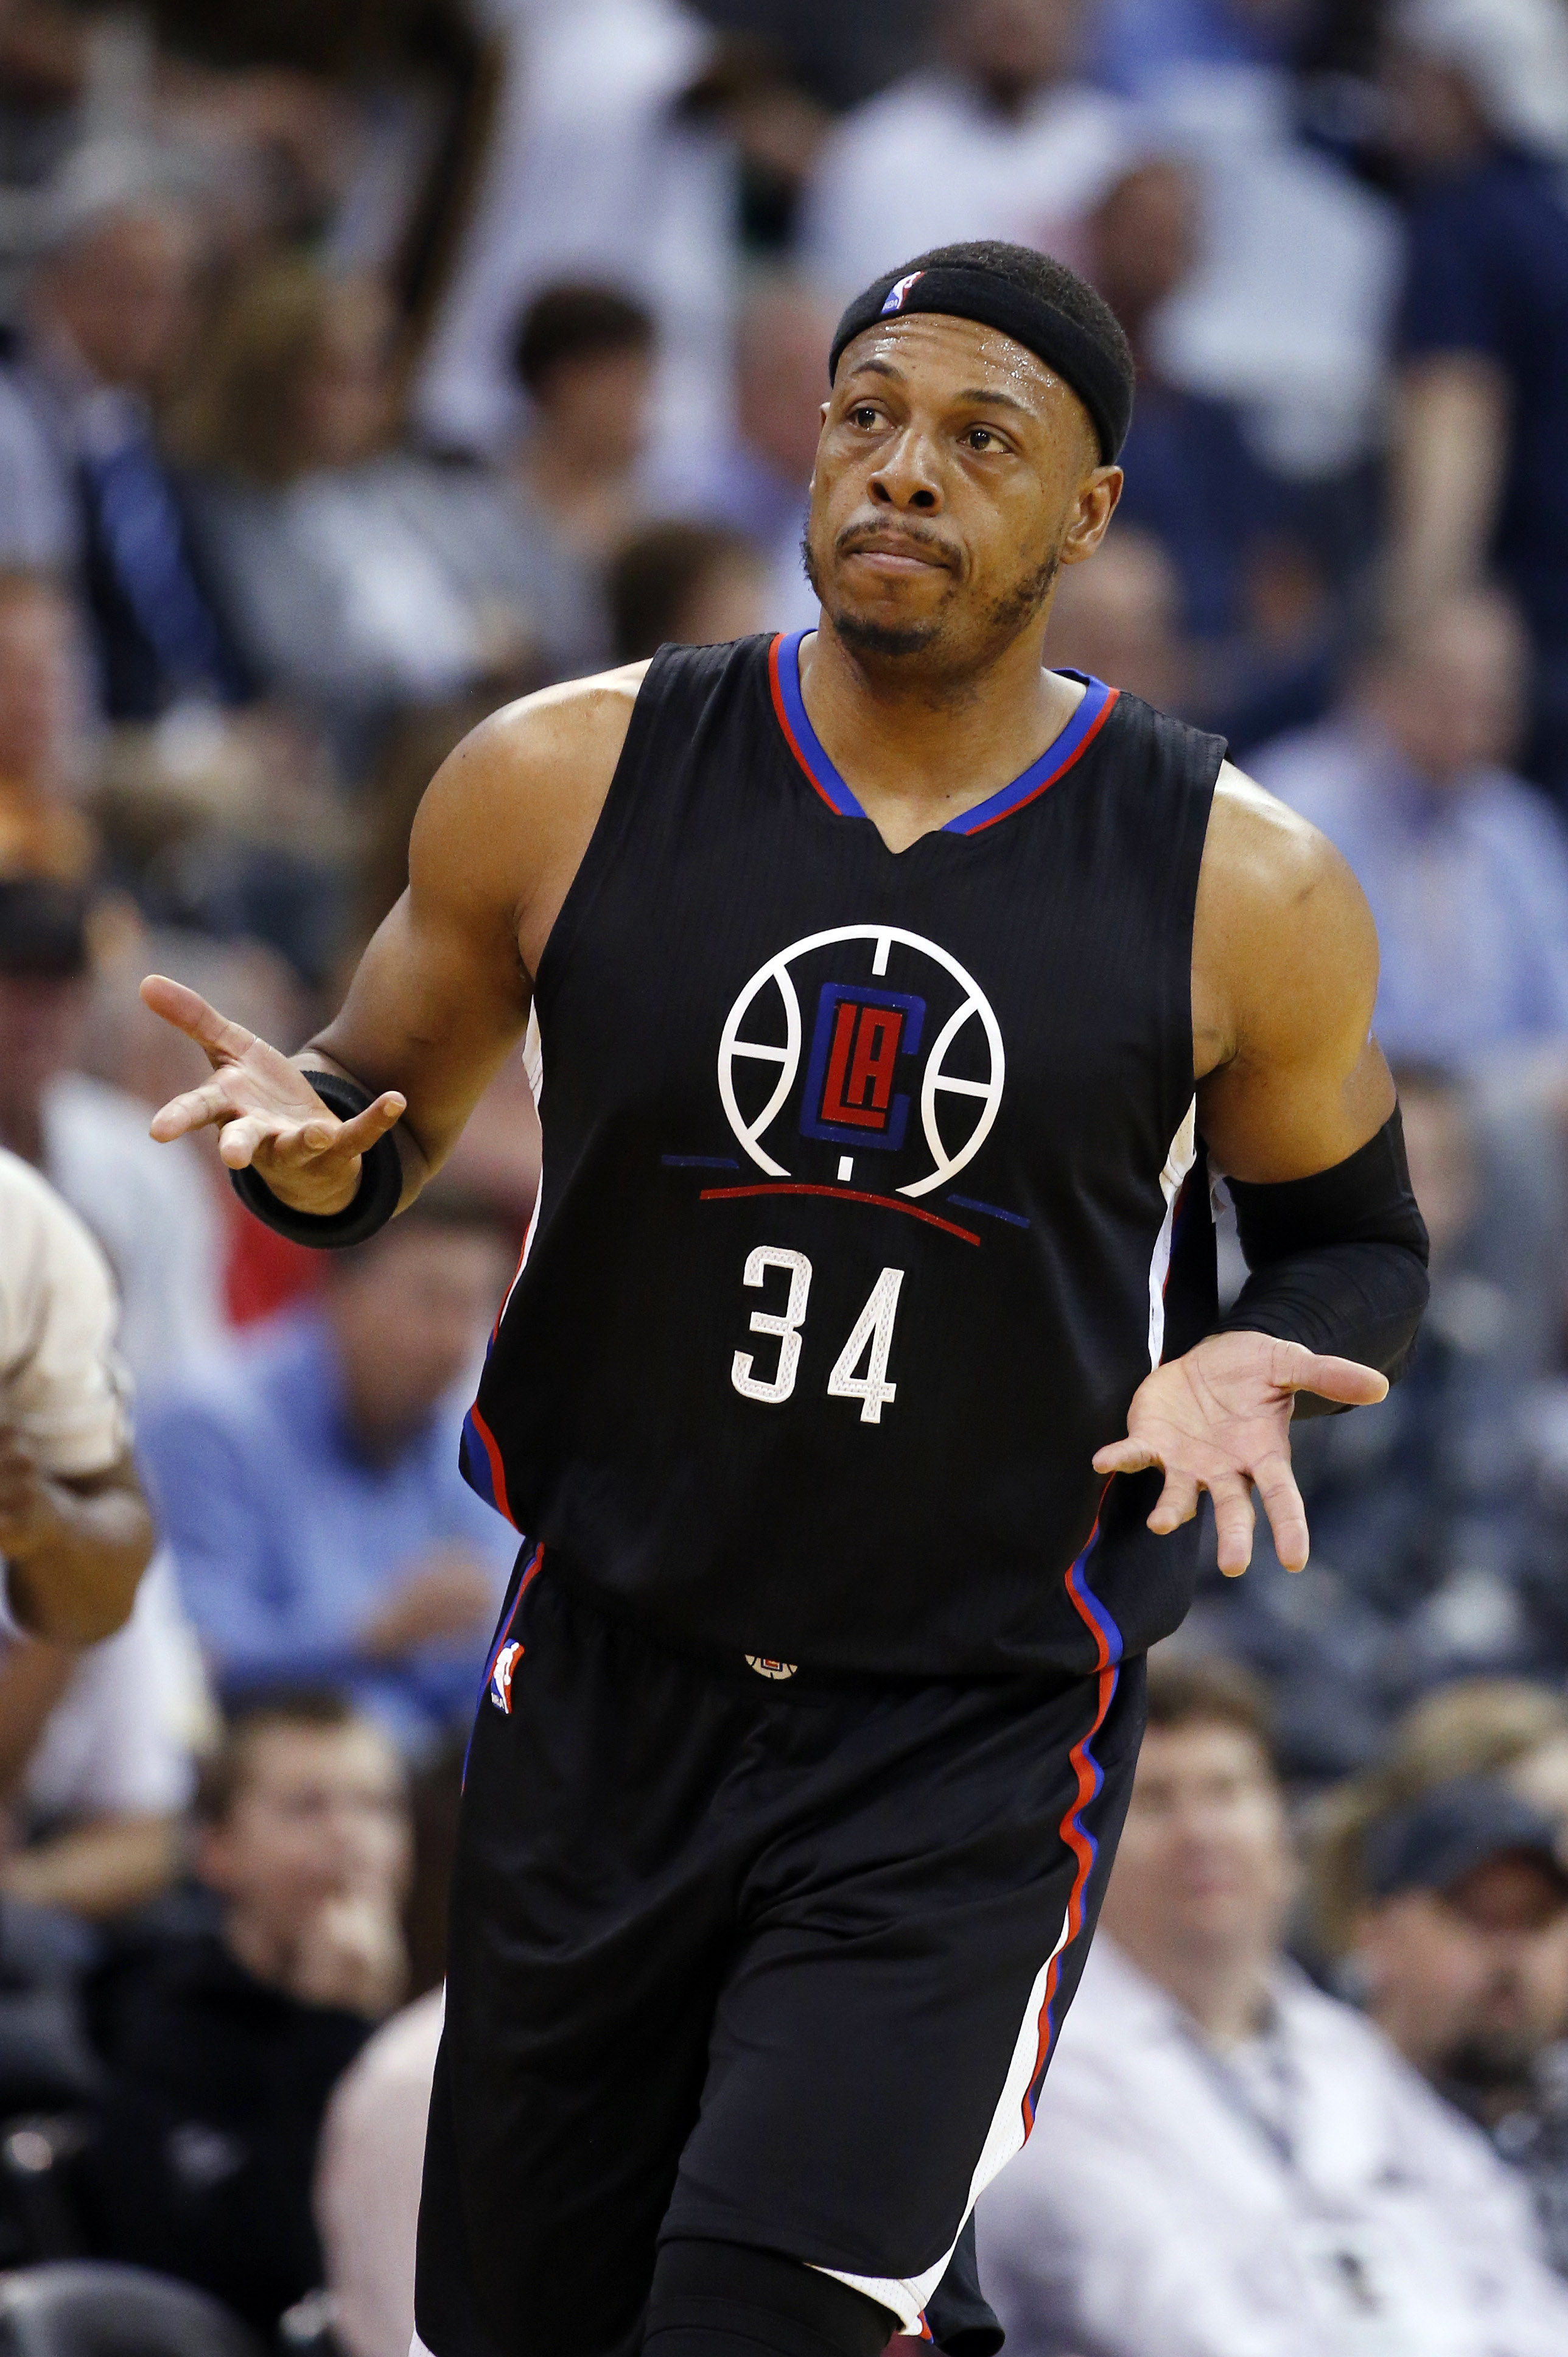 Paul Pierce reveals that he wanted to be drafted by the Clippers